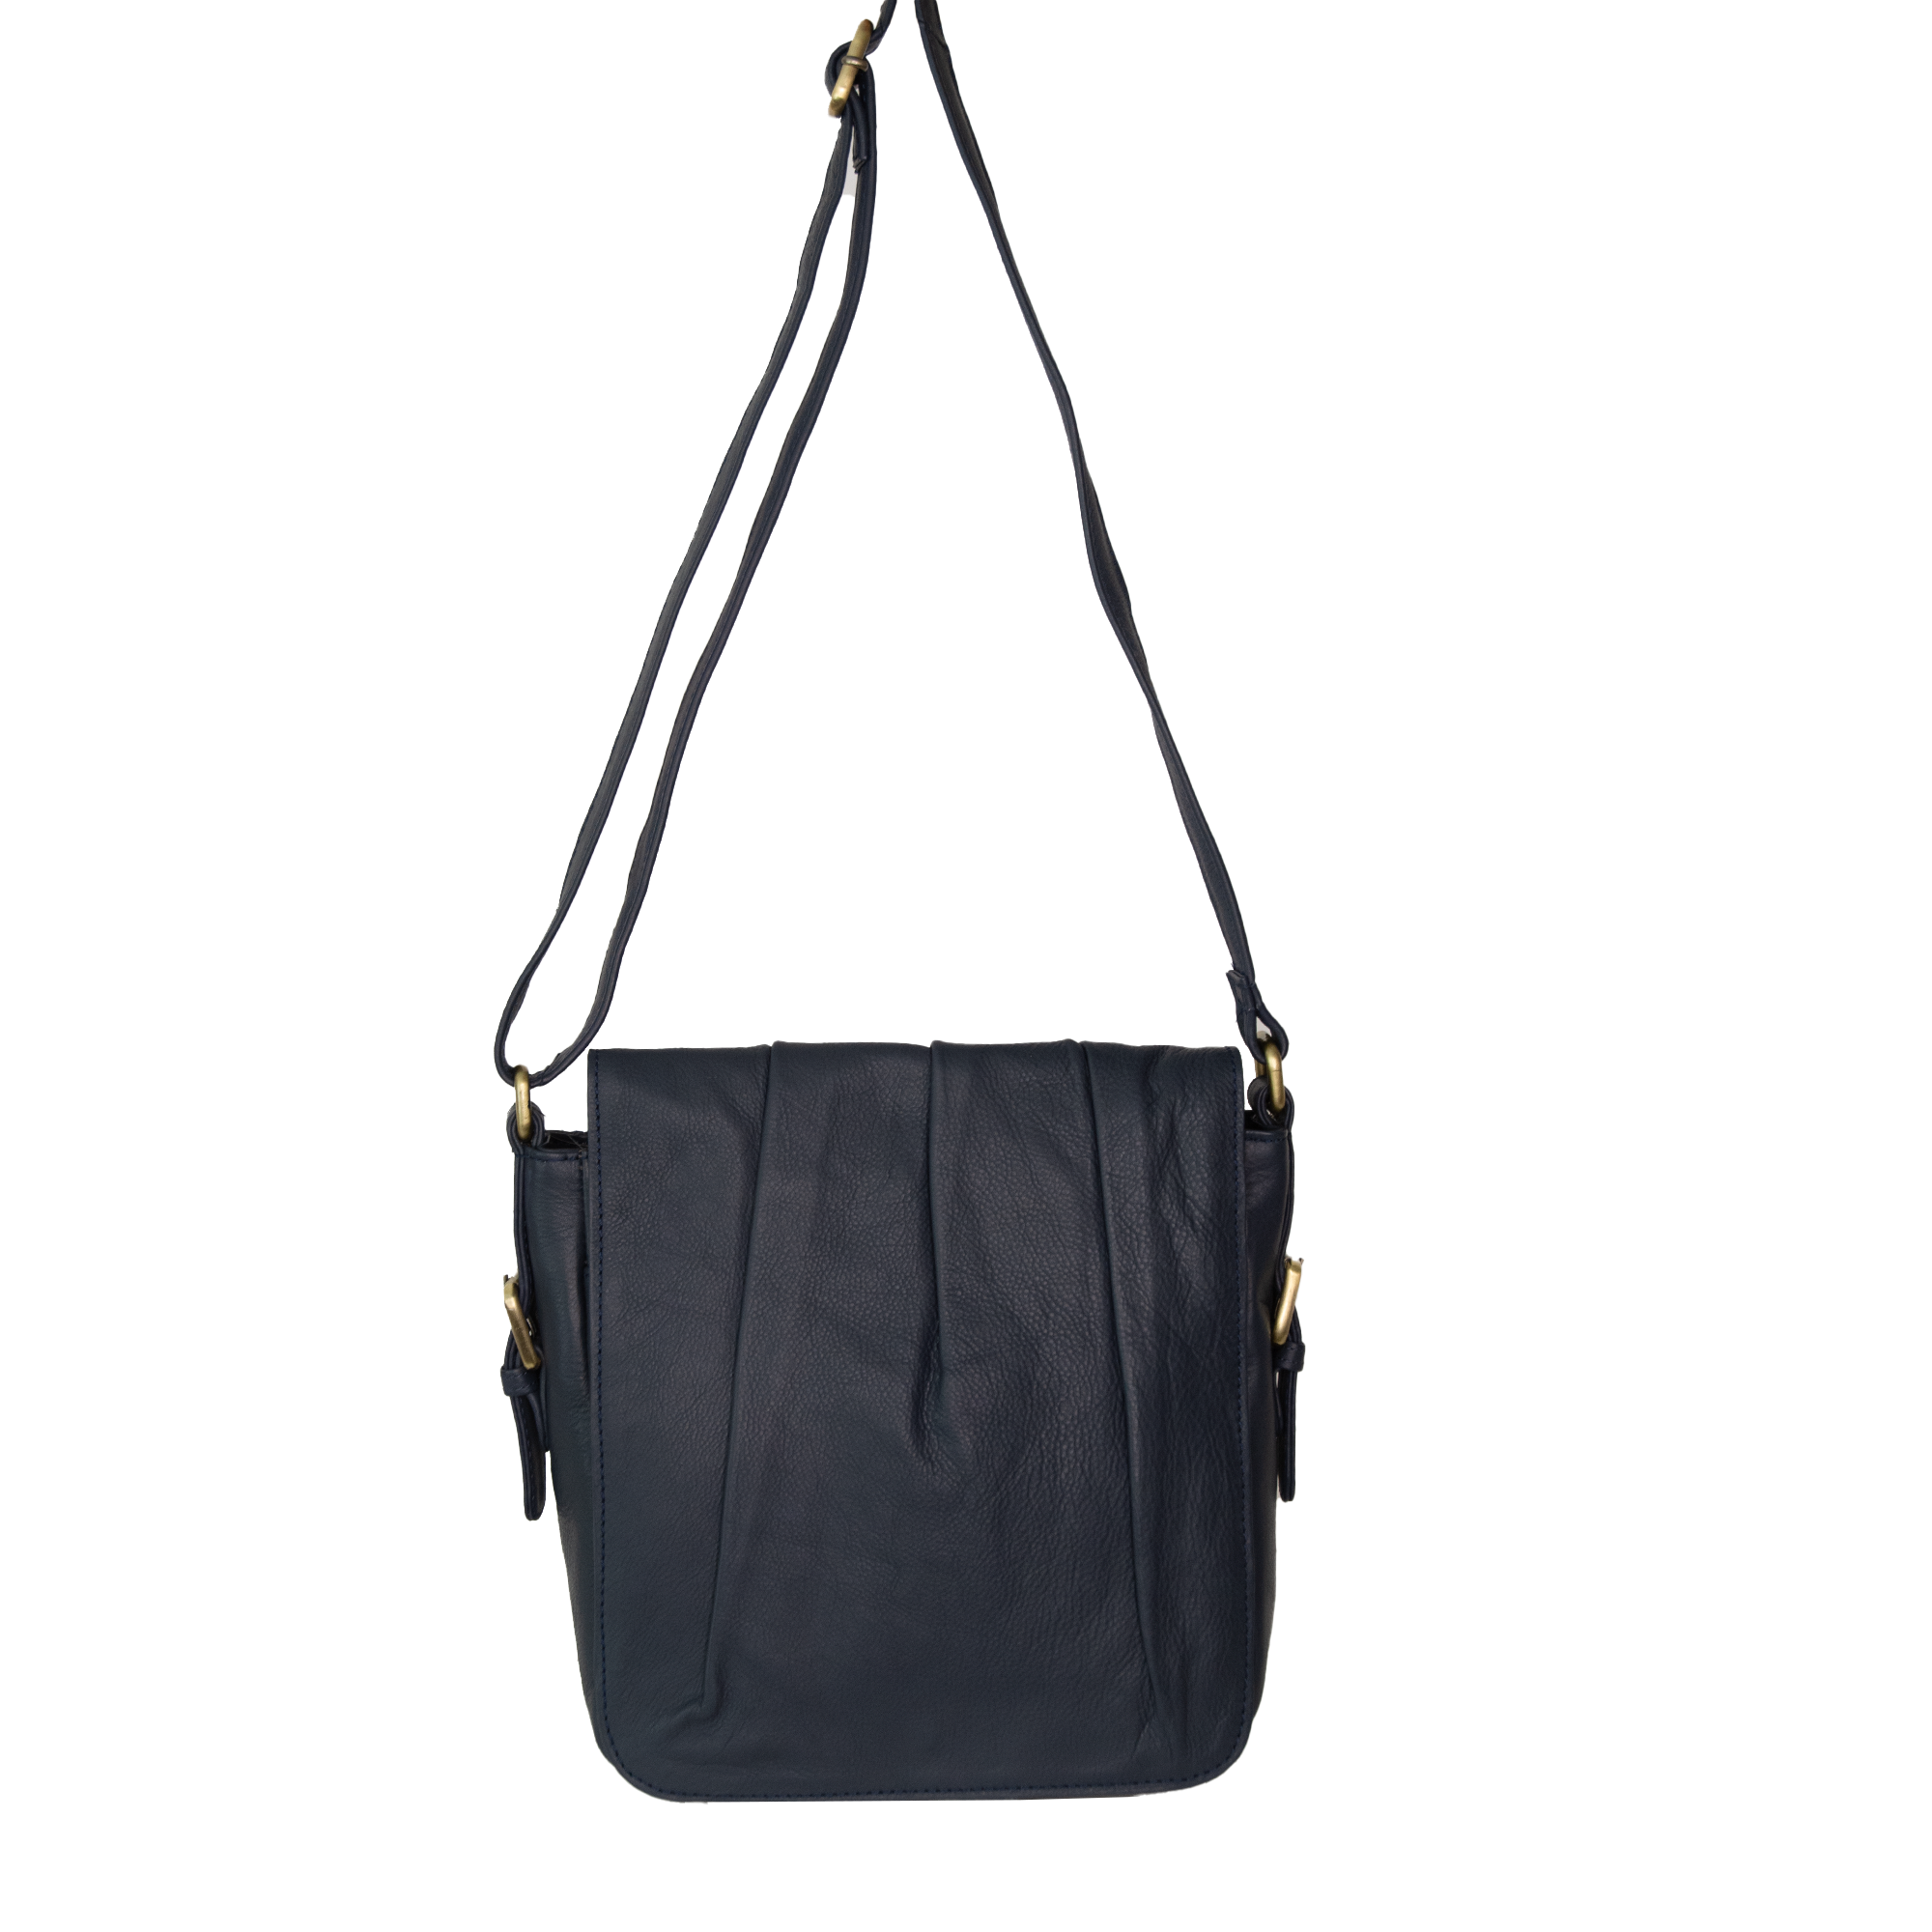 Florence - (Nappa Leather) Ruched Flapover Cross Body Bag by Bolla